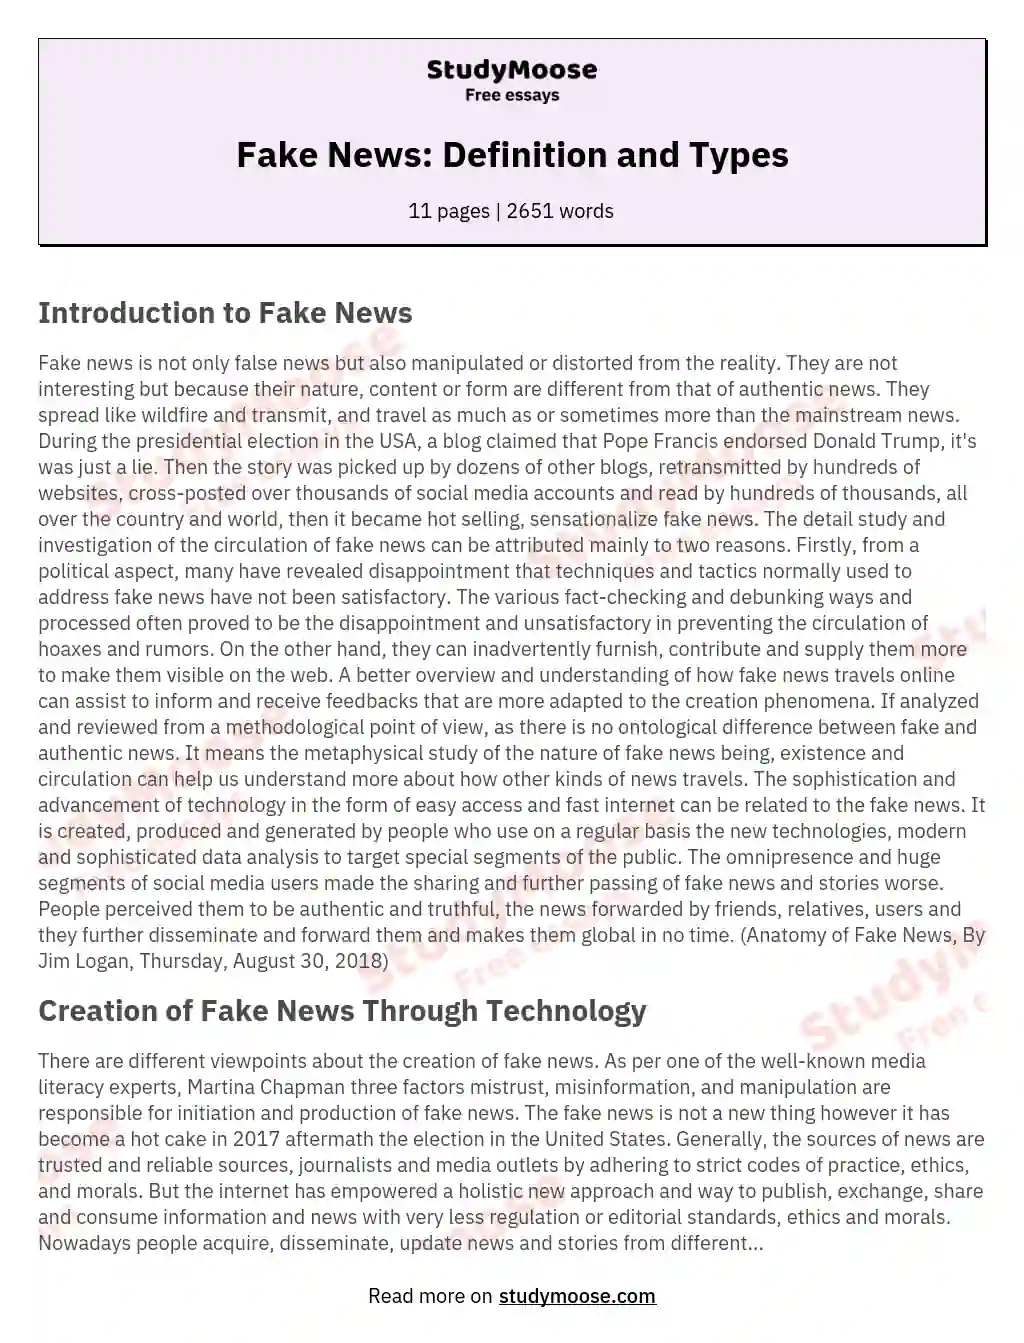 Fake News: Definition and Types